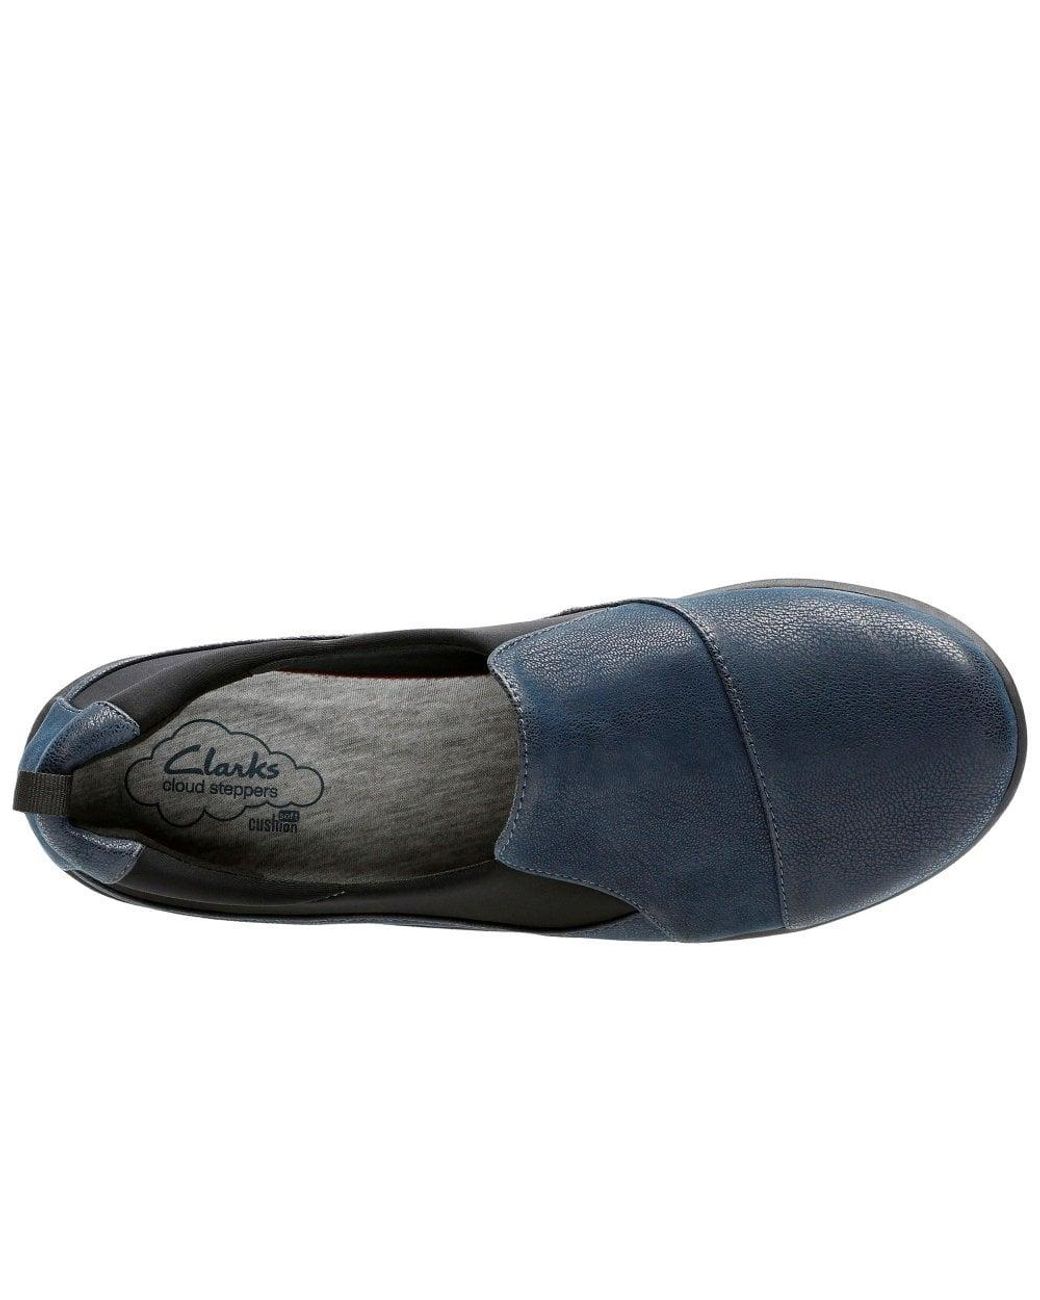 clarks shoes womens flat rottura Maiale 